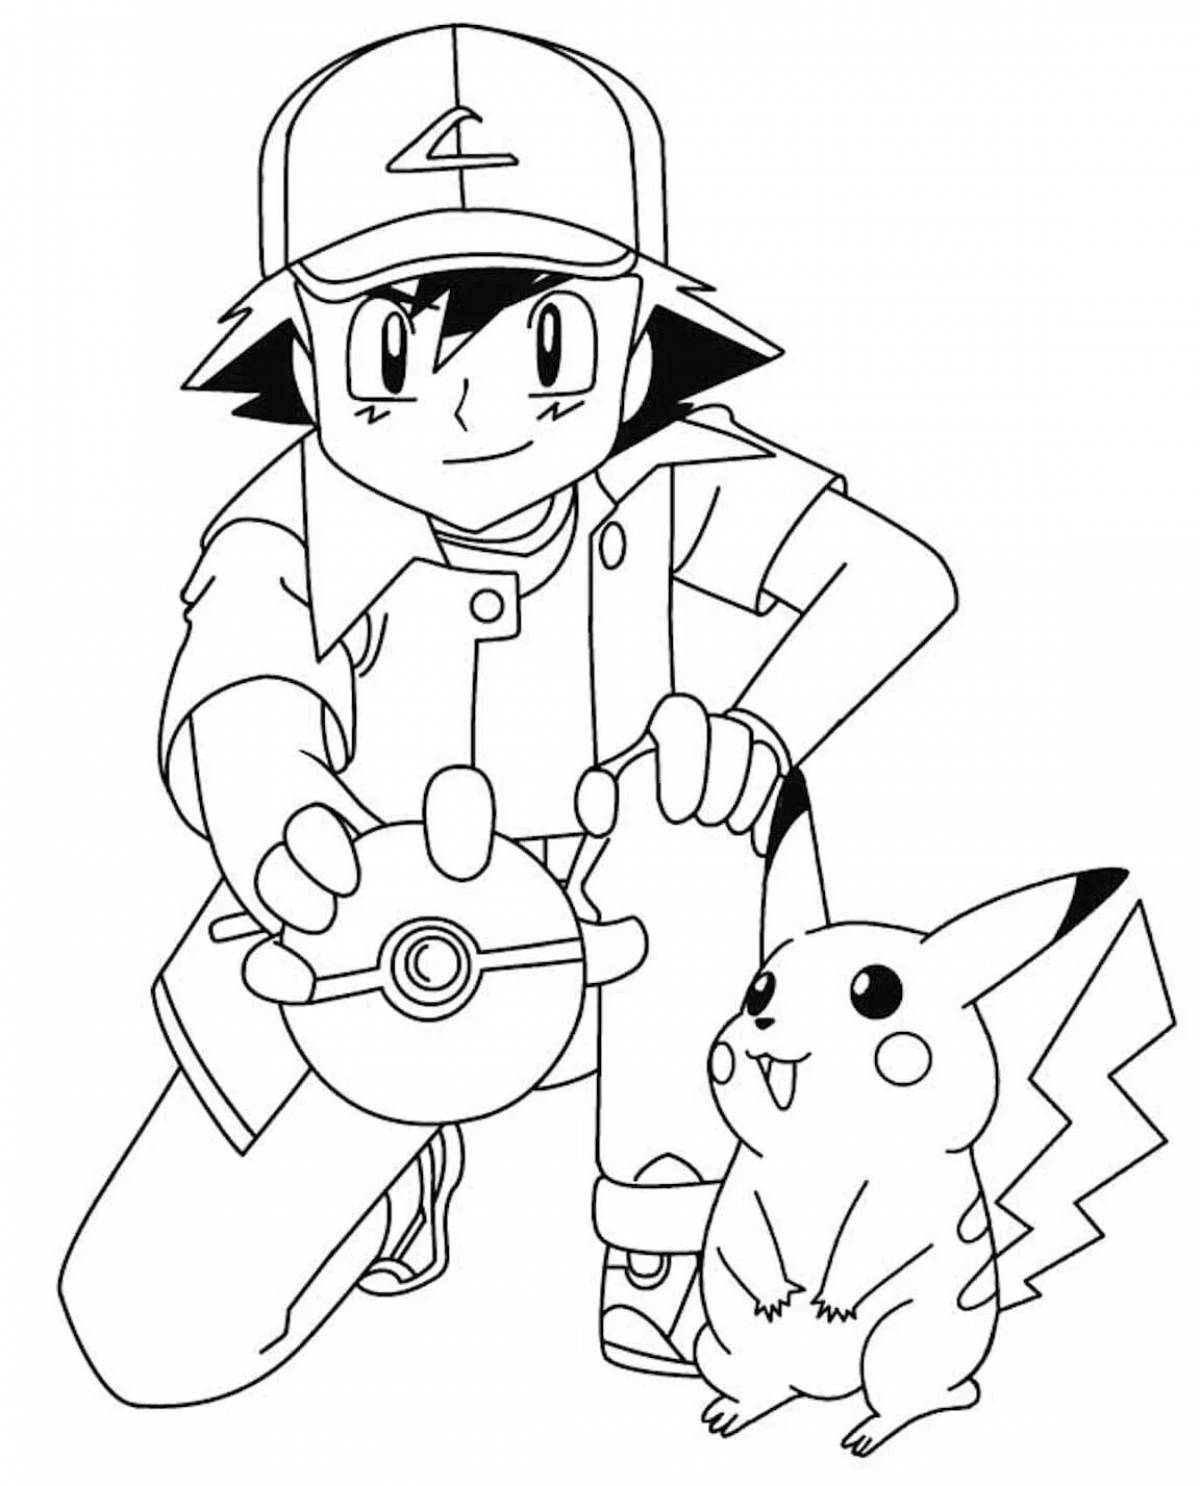 Amazing pikachu coloring page